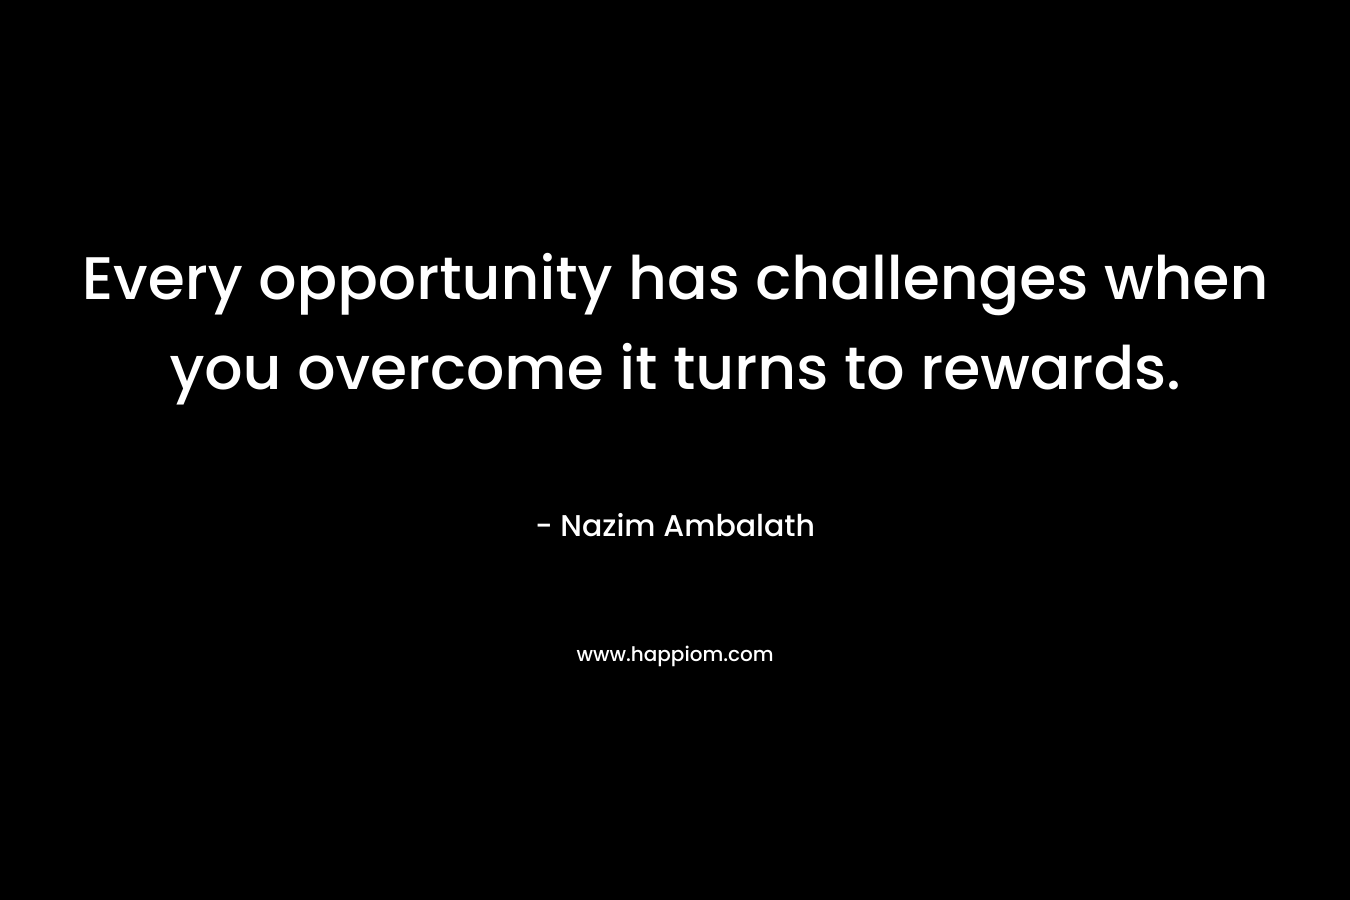 Every opportunity has challenges when you overcome it turns to rewards.